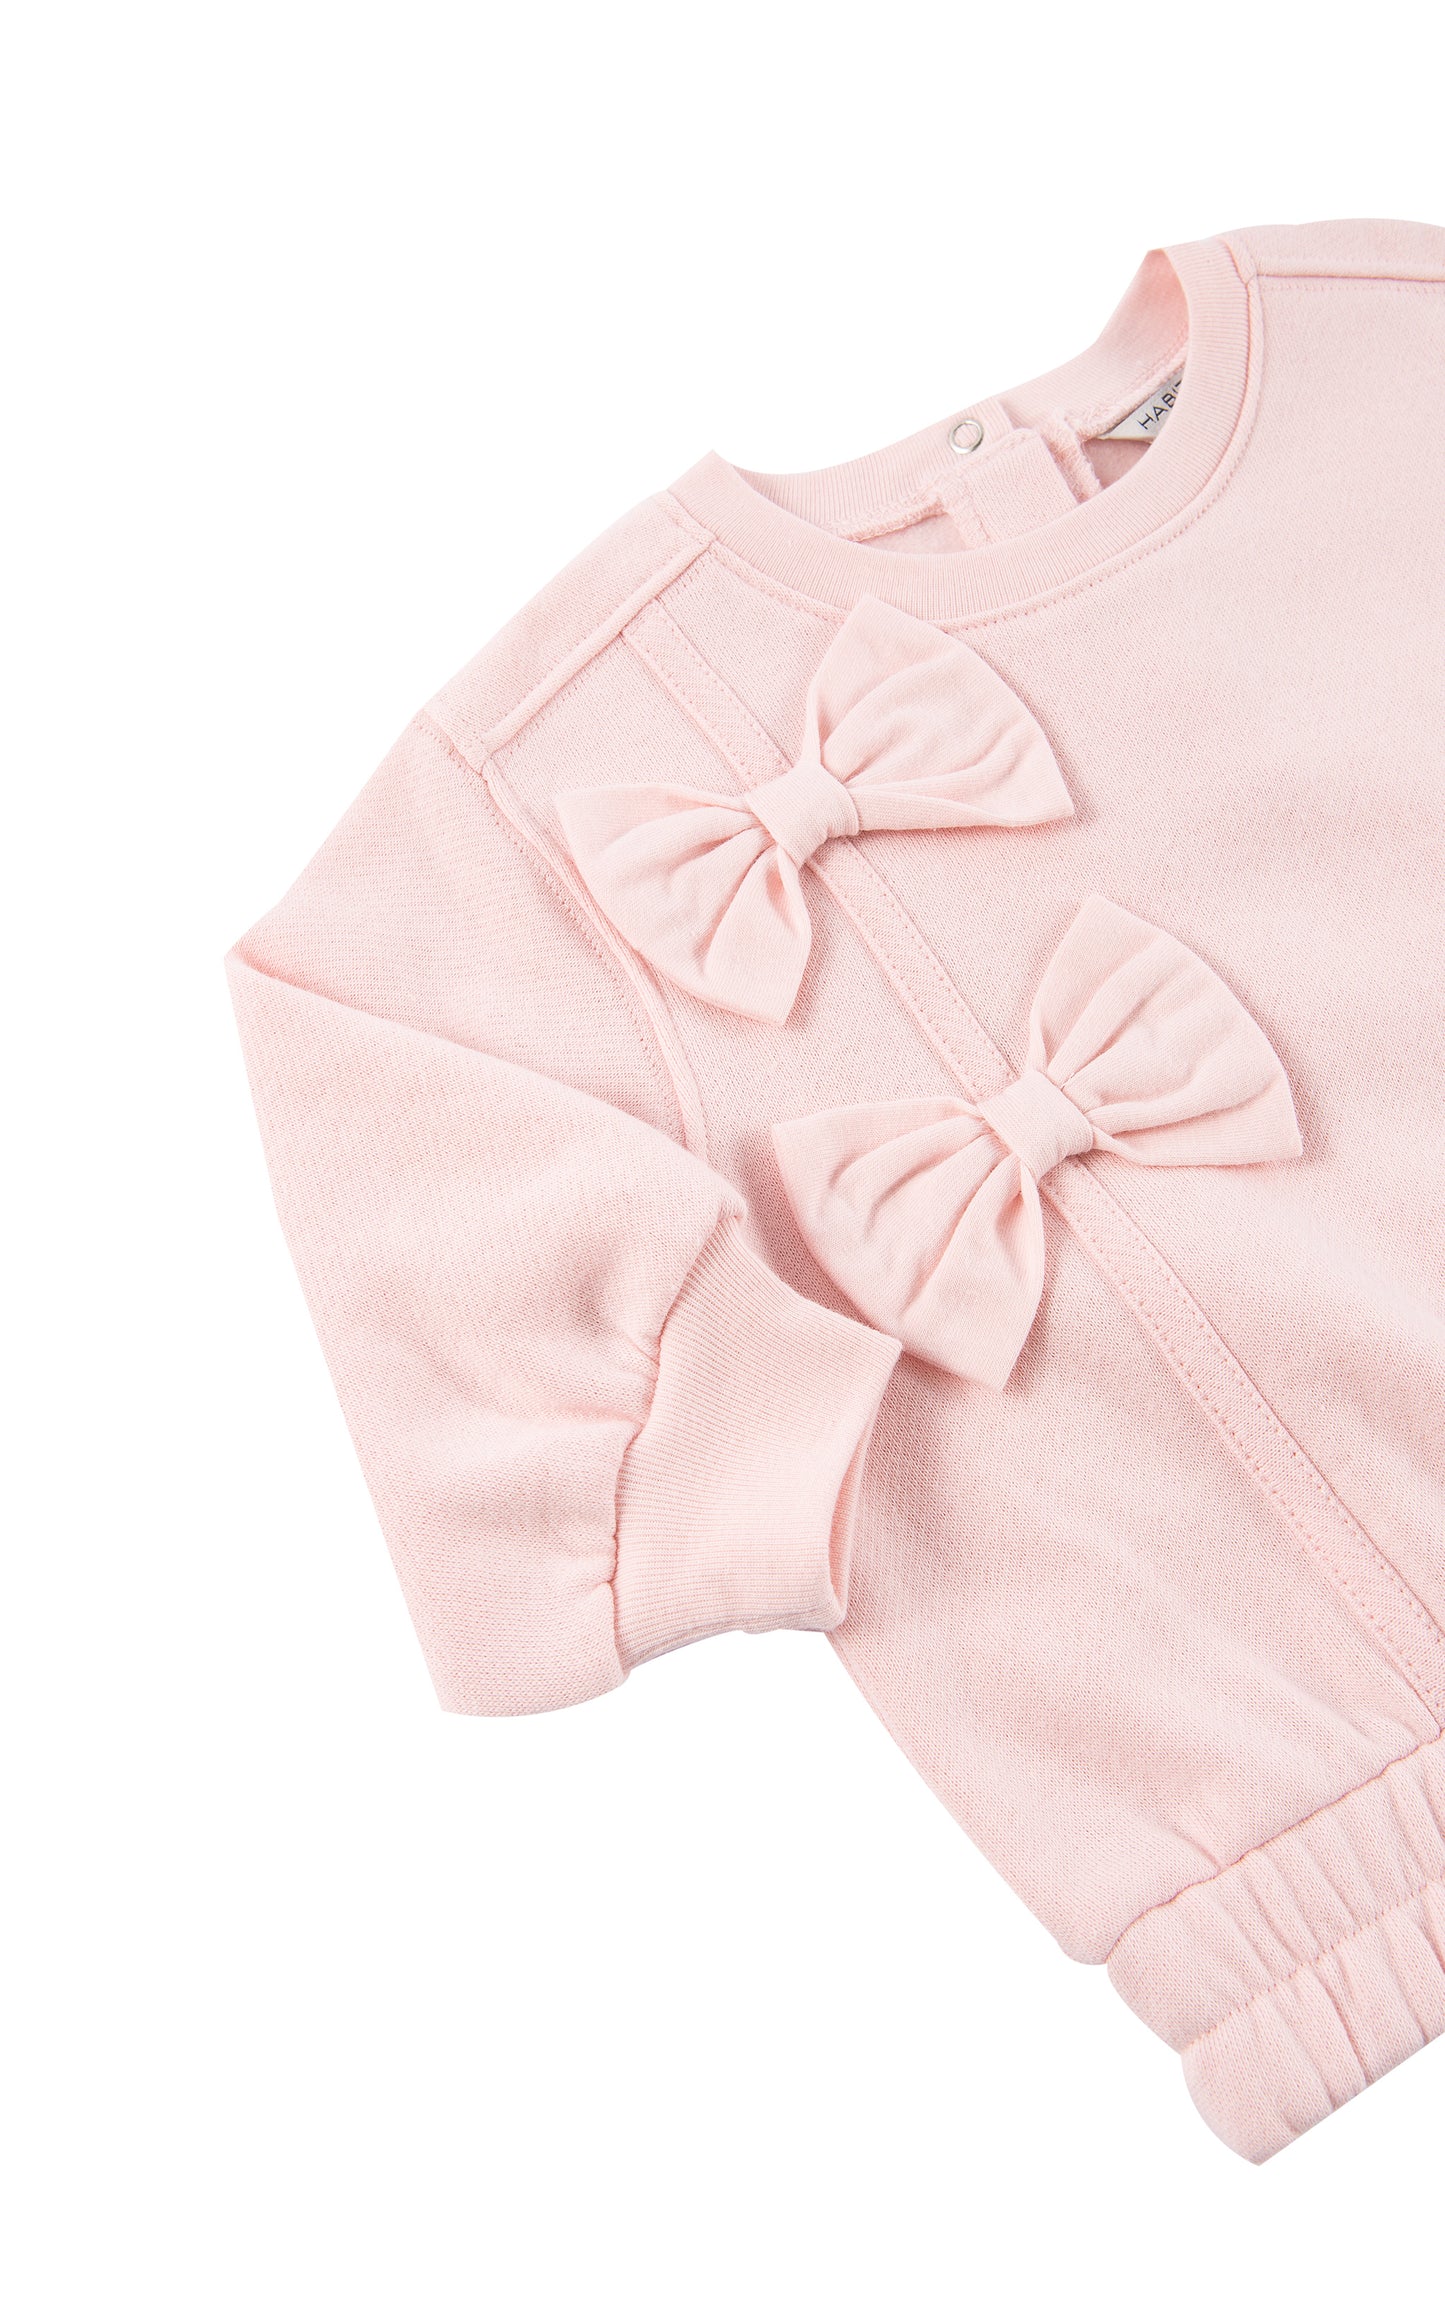 Side view of pink fleece sweatshirt with a bow 